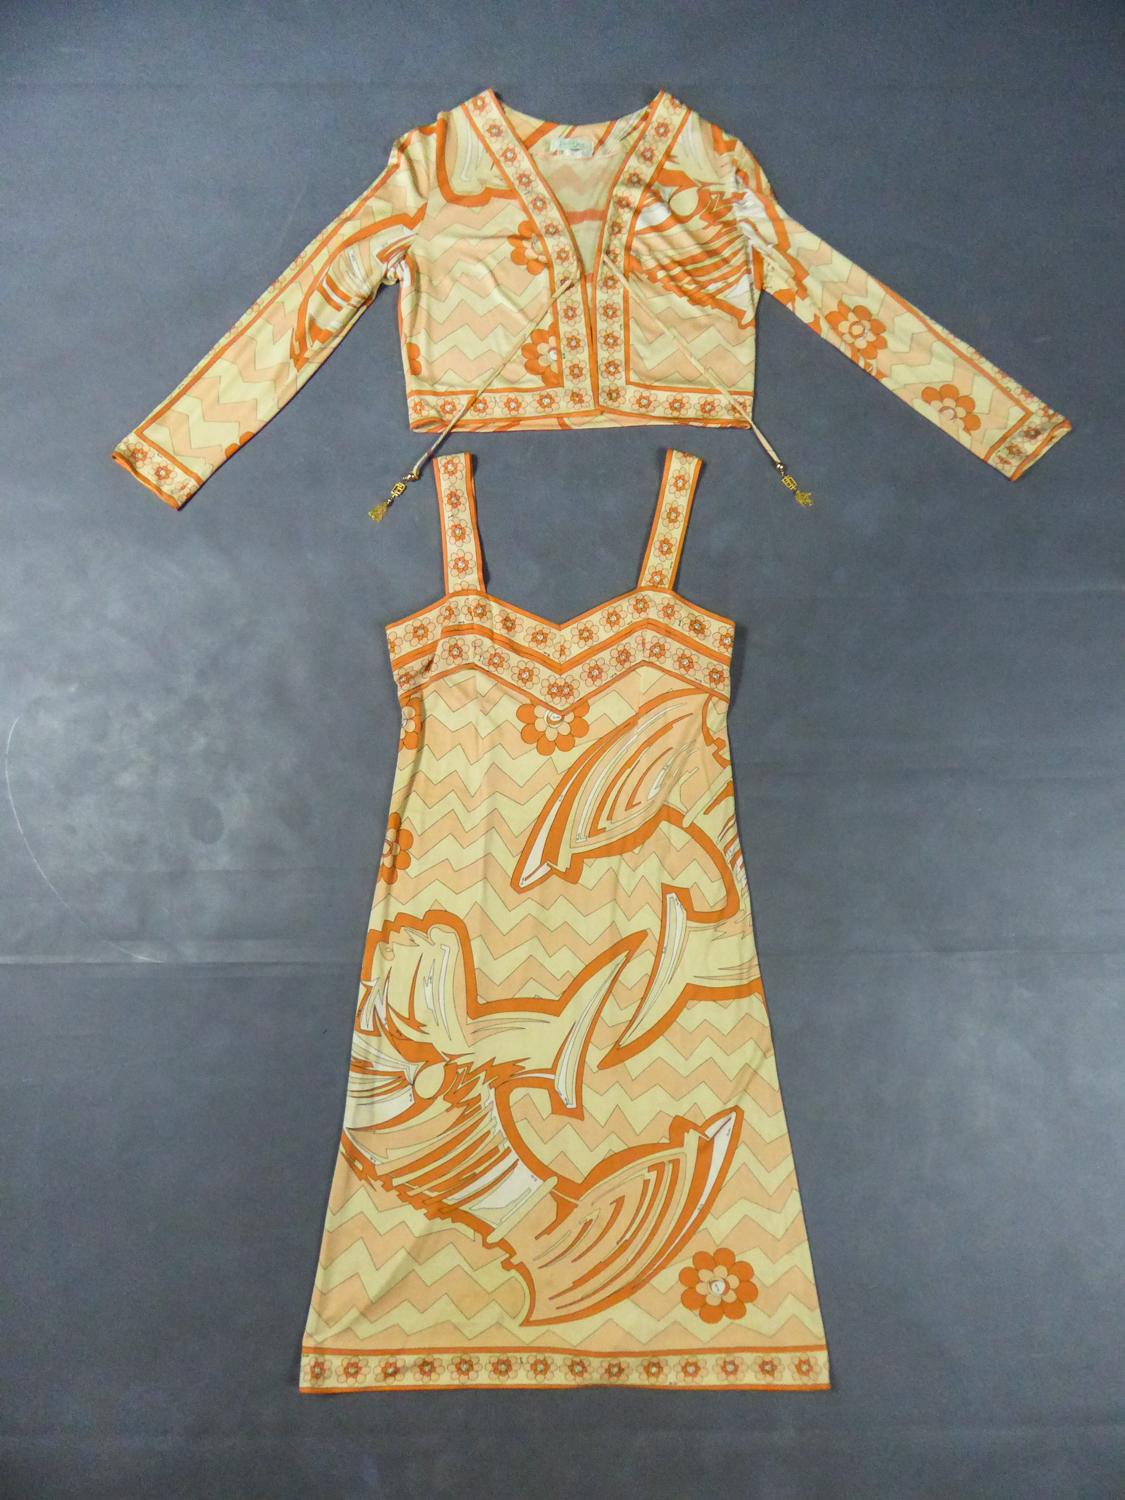 Circa 1960/1970
Italy

Emilio Pucci summer dress and vest set in psychedelic printed silk jersey in shades of orange, light orange, yellow and white from the 1960s. Straight fit and slightly skin-tight without sleeves. Vest with long sleeves that